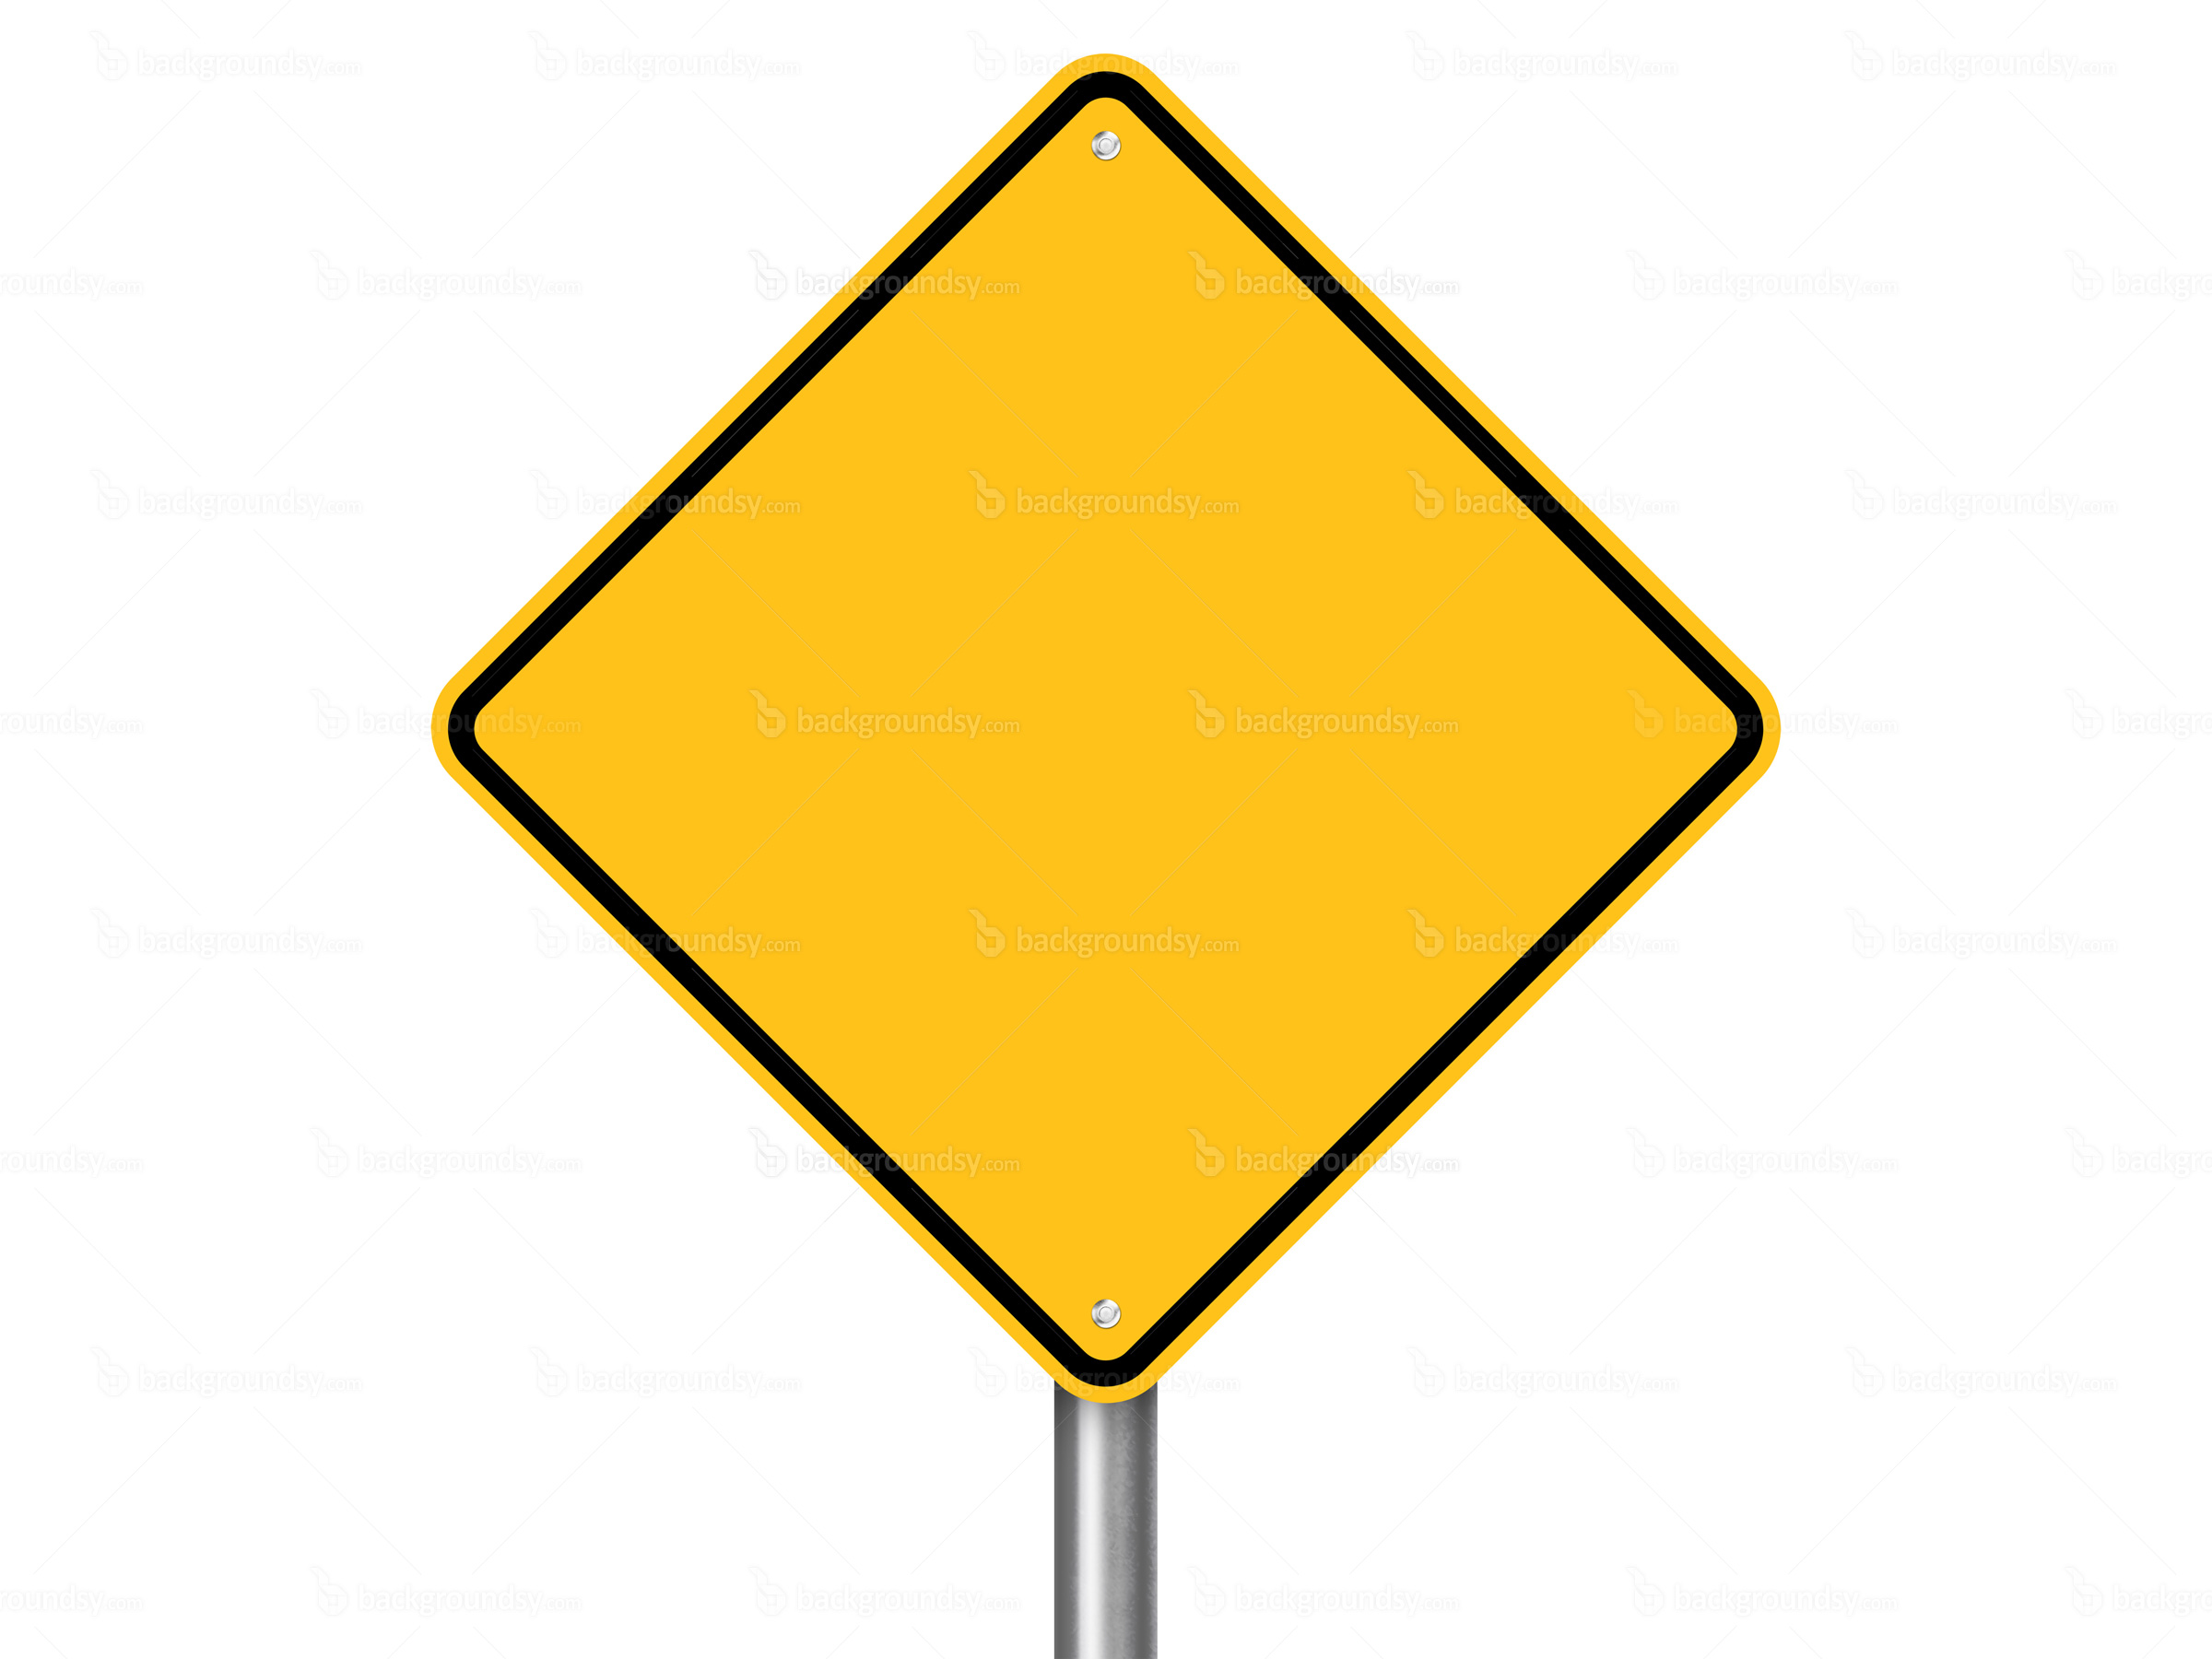 Yellow street sign | Backgroundsy.com